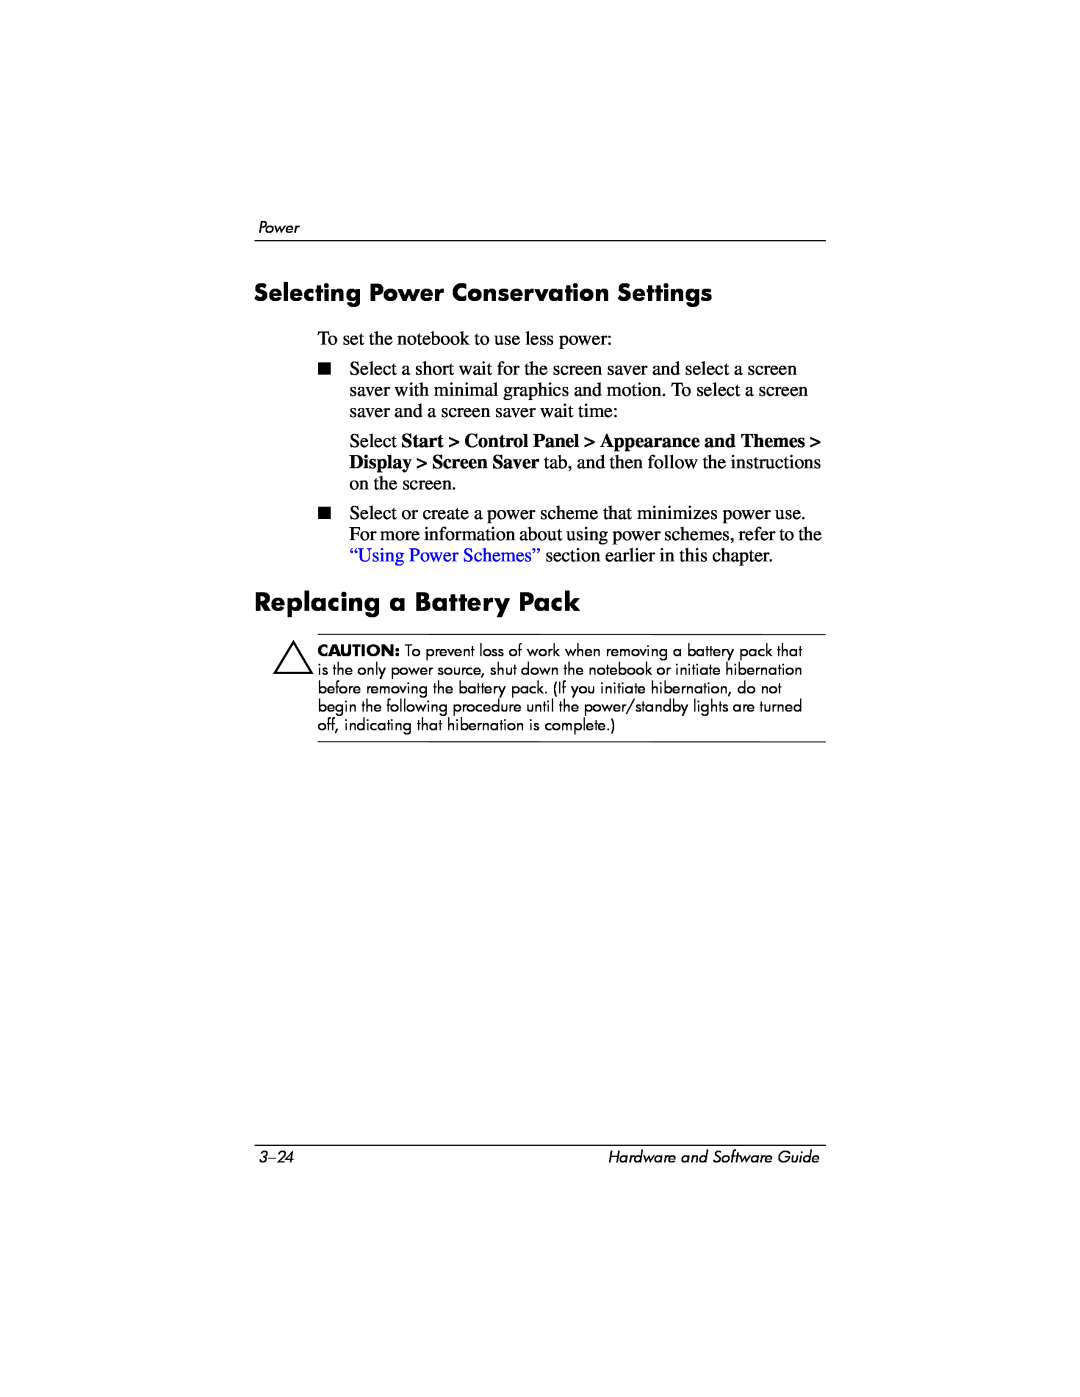 Compaq Presario M2000 manual Replacing a Battery Pack, Selecting Power Conservation Settings 